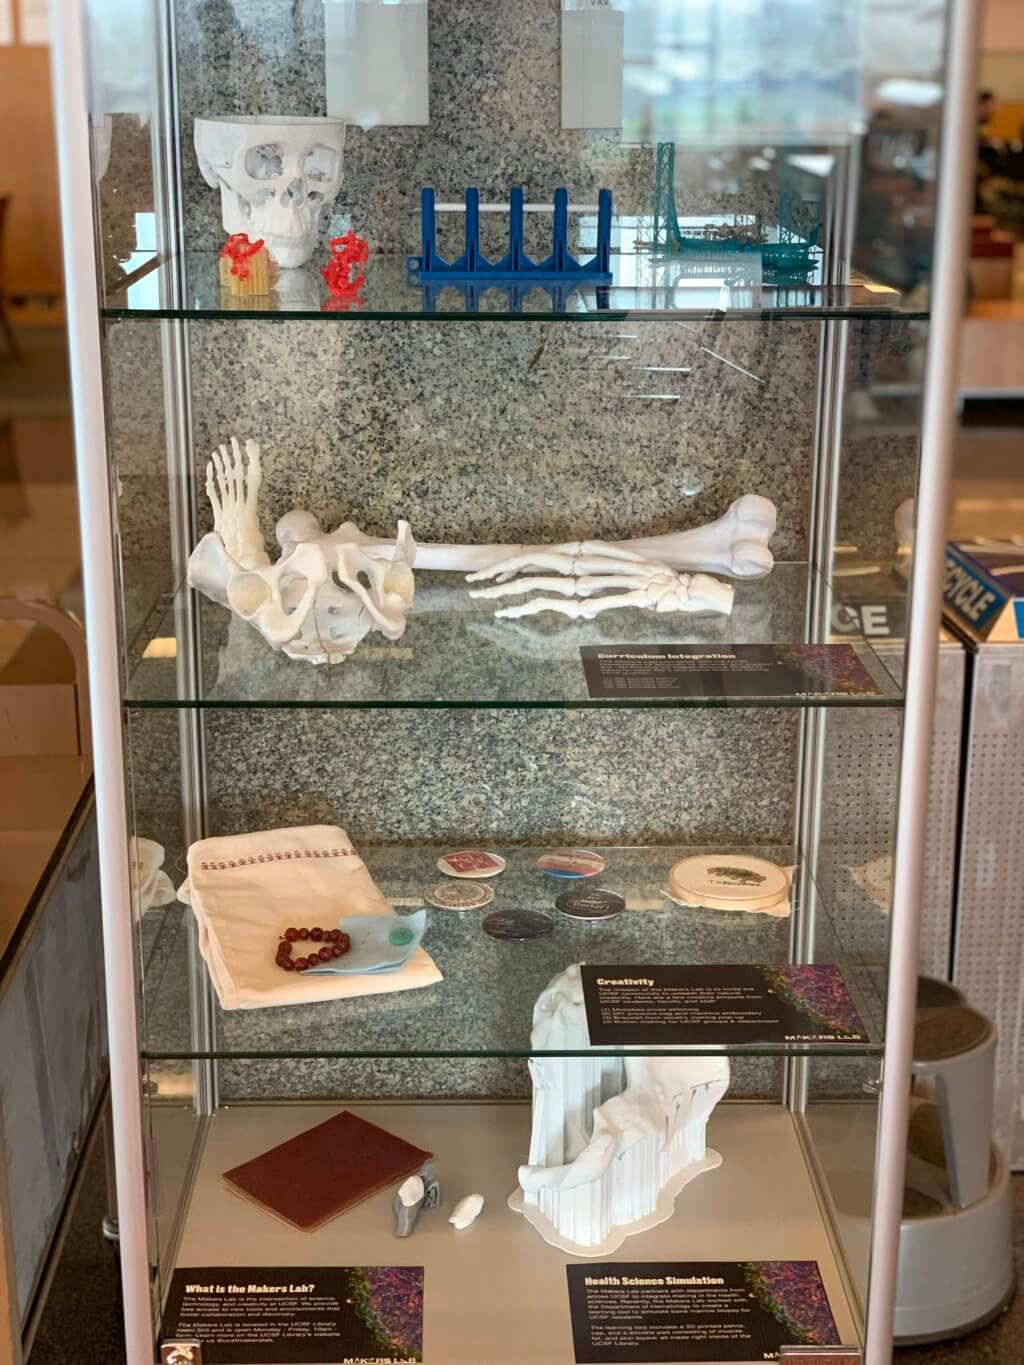 Makers lab project display case